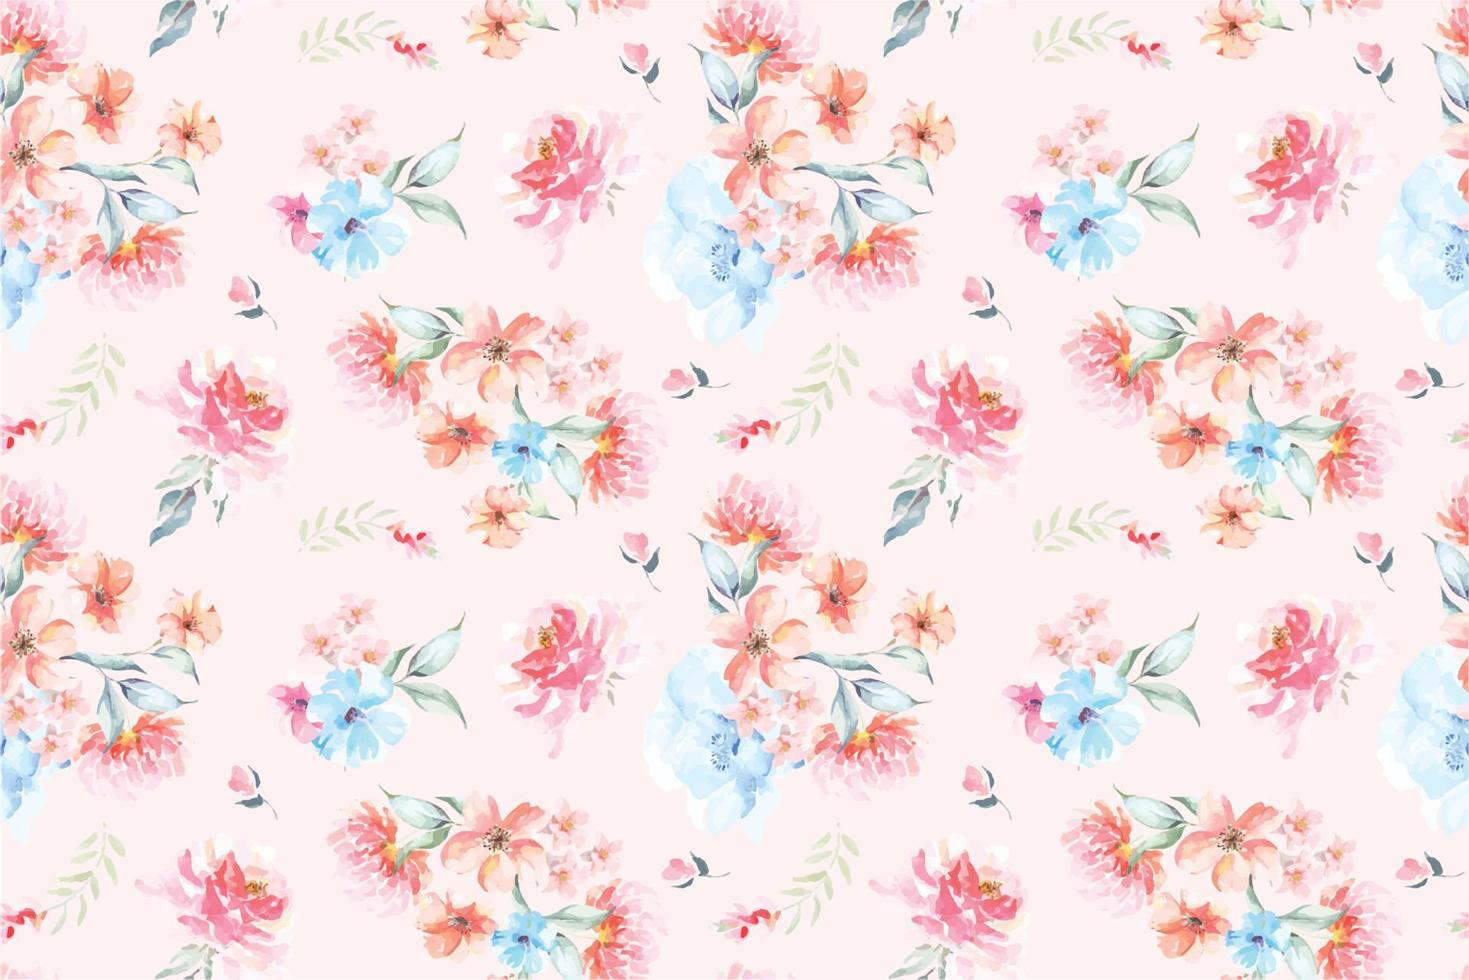 Seamless pattern of Blooming flowers with watercolor 38 vector